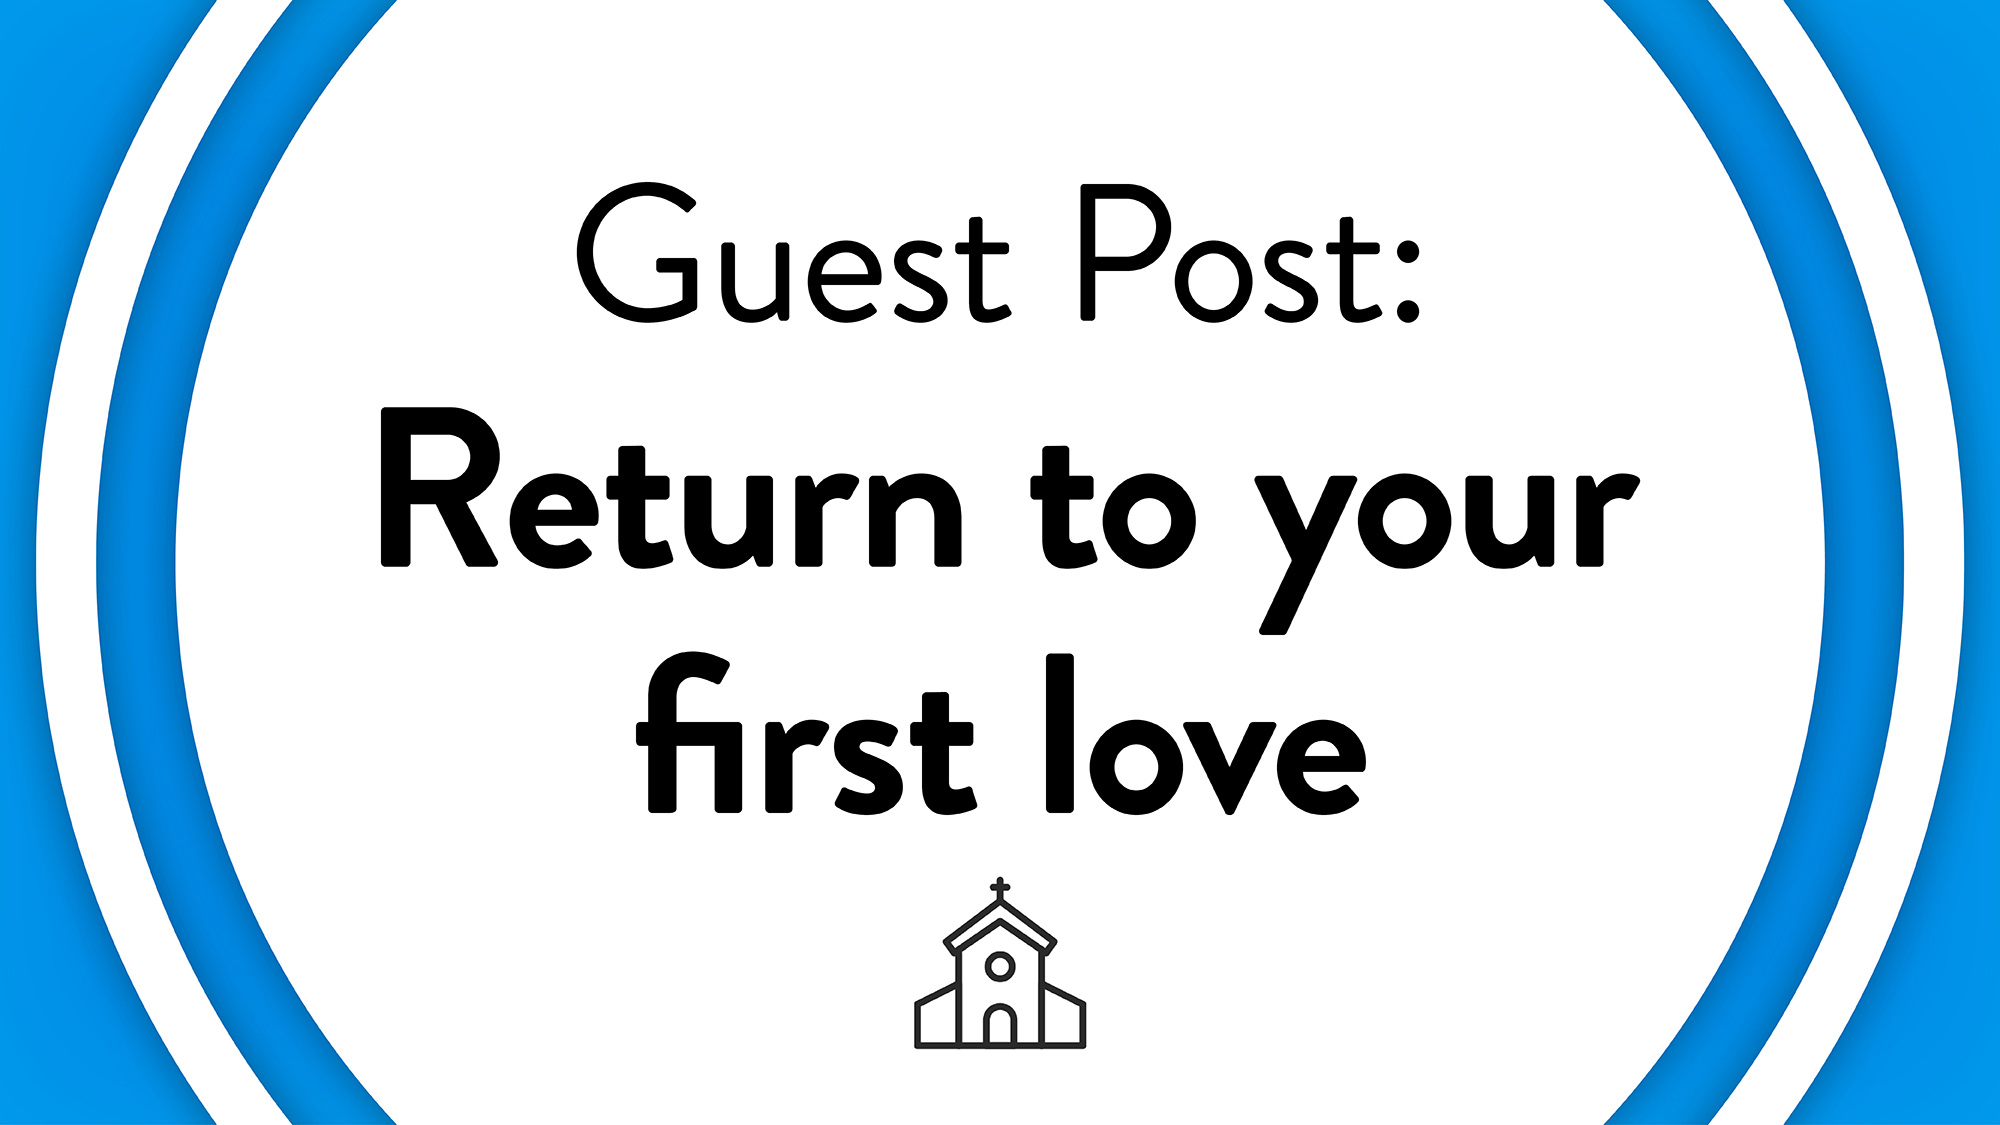 Guest Post: Return to your first love